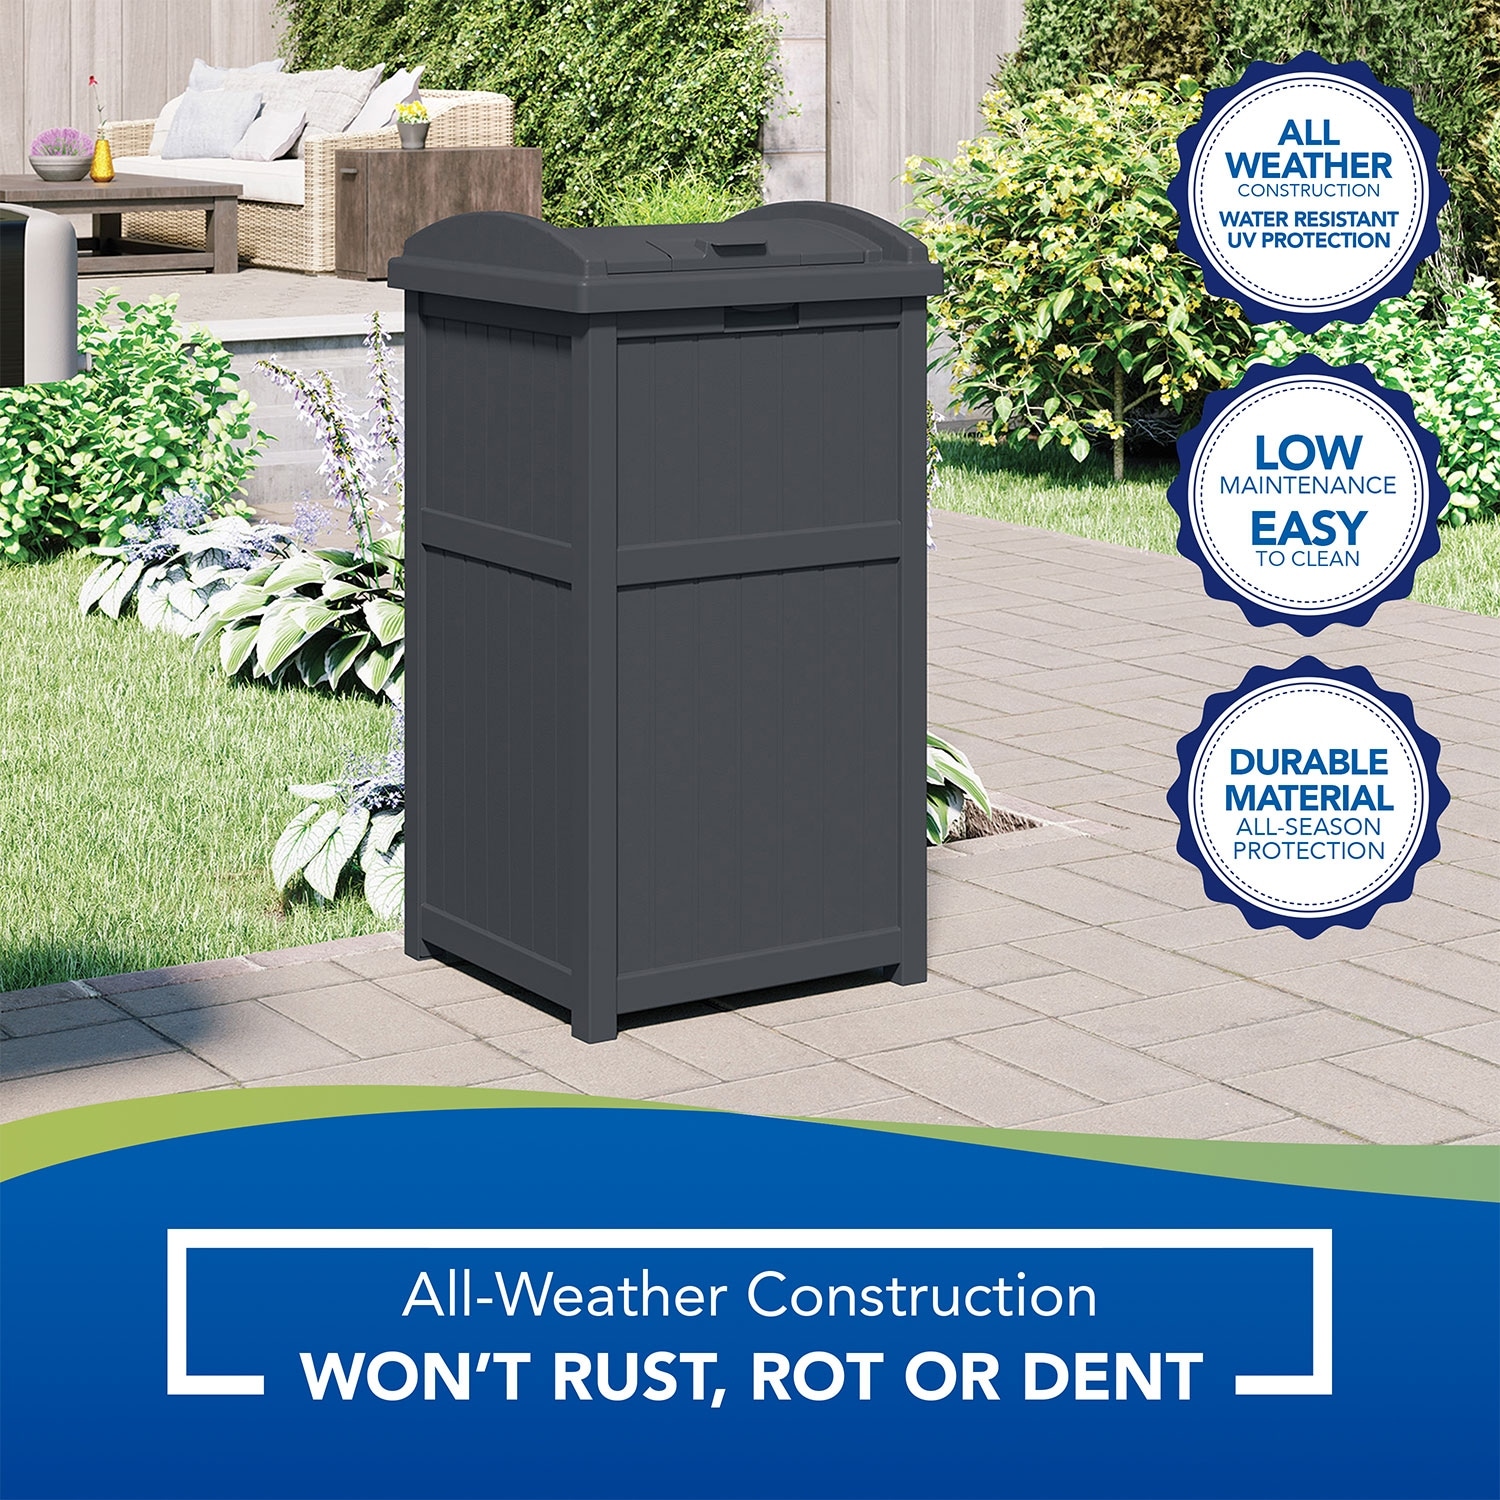 https://ak1.ostkcdn.com/images/products/is/images/direct/81a3e2671346e42fe33c8aa3828f925a593809f3/Suncast-Trashcan-Hideaway-Outdoor-33-Gallon-Garbage-Trash-Waste-Bin%2C-Cyberspace.jpg